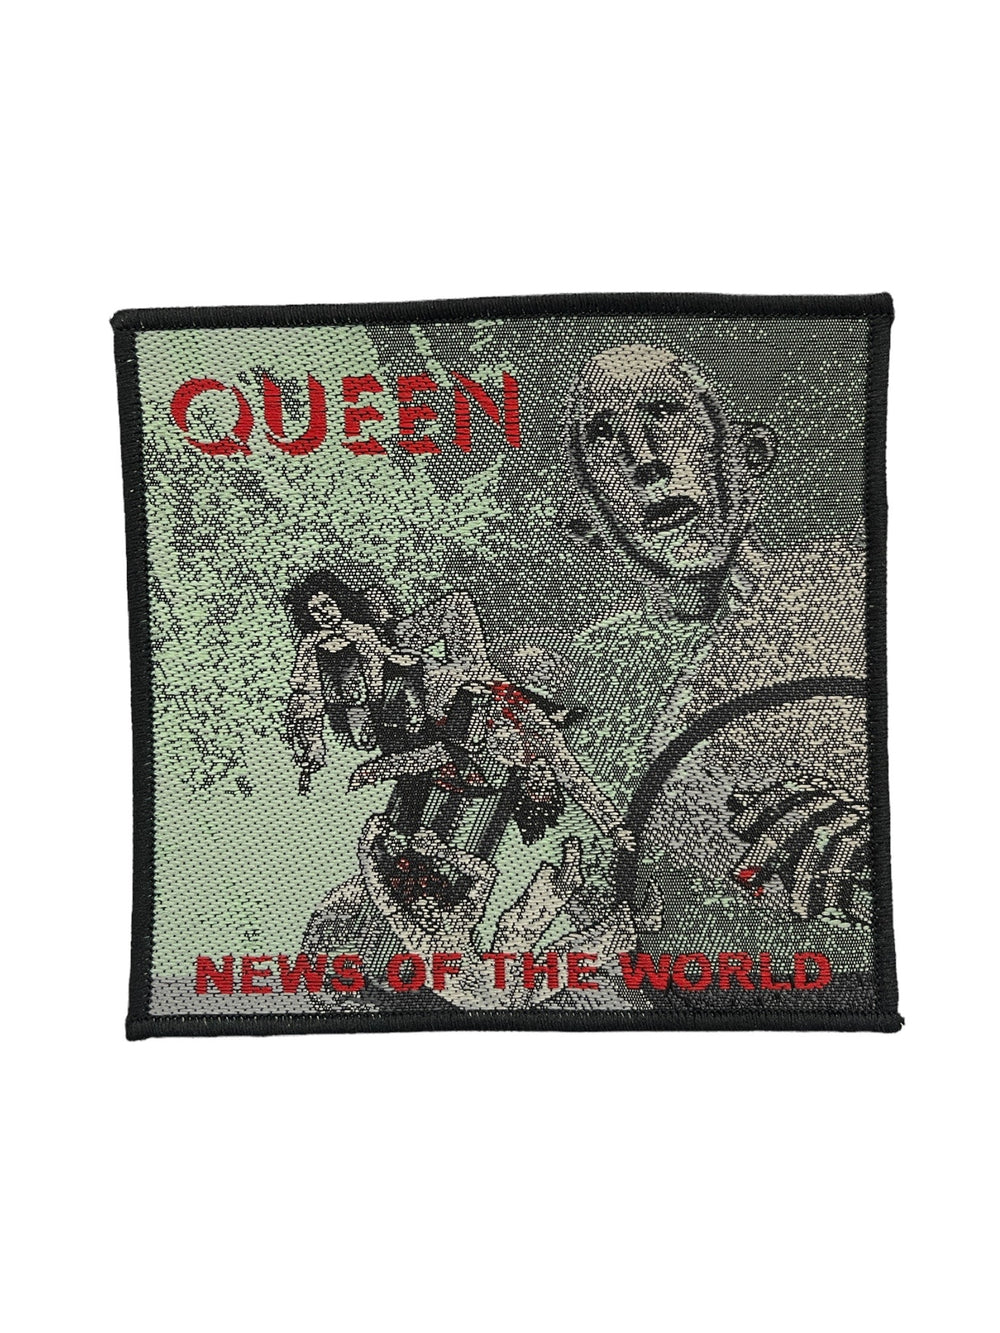 Queen News Of The World Official Woven Patch Brand New Freddie Mercury